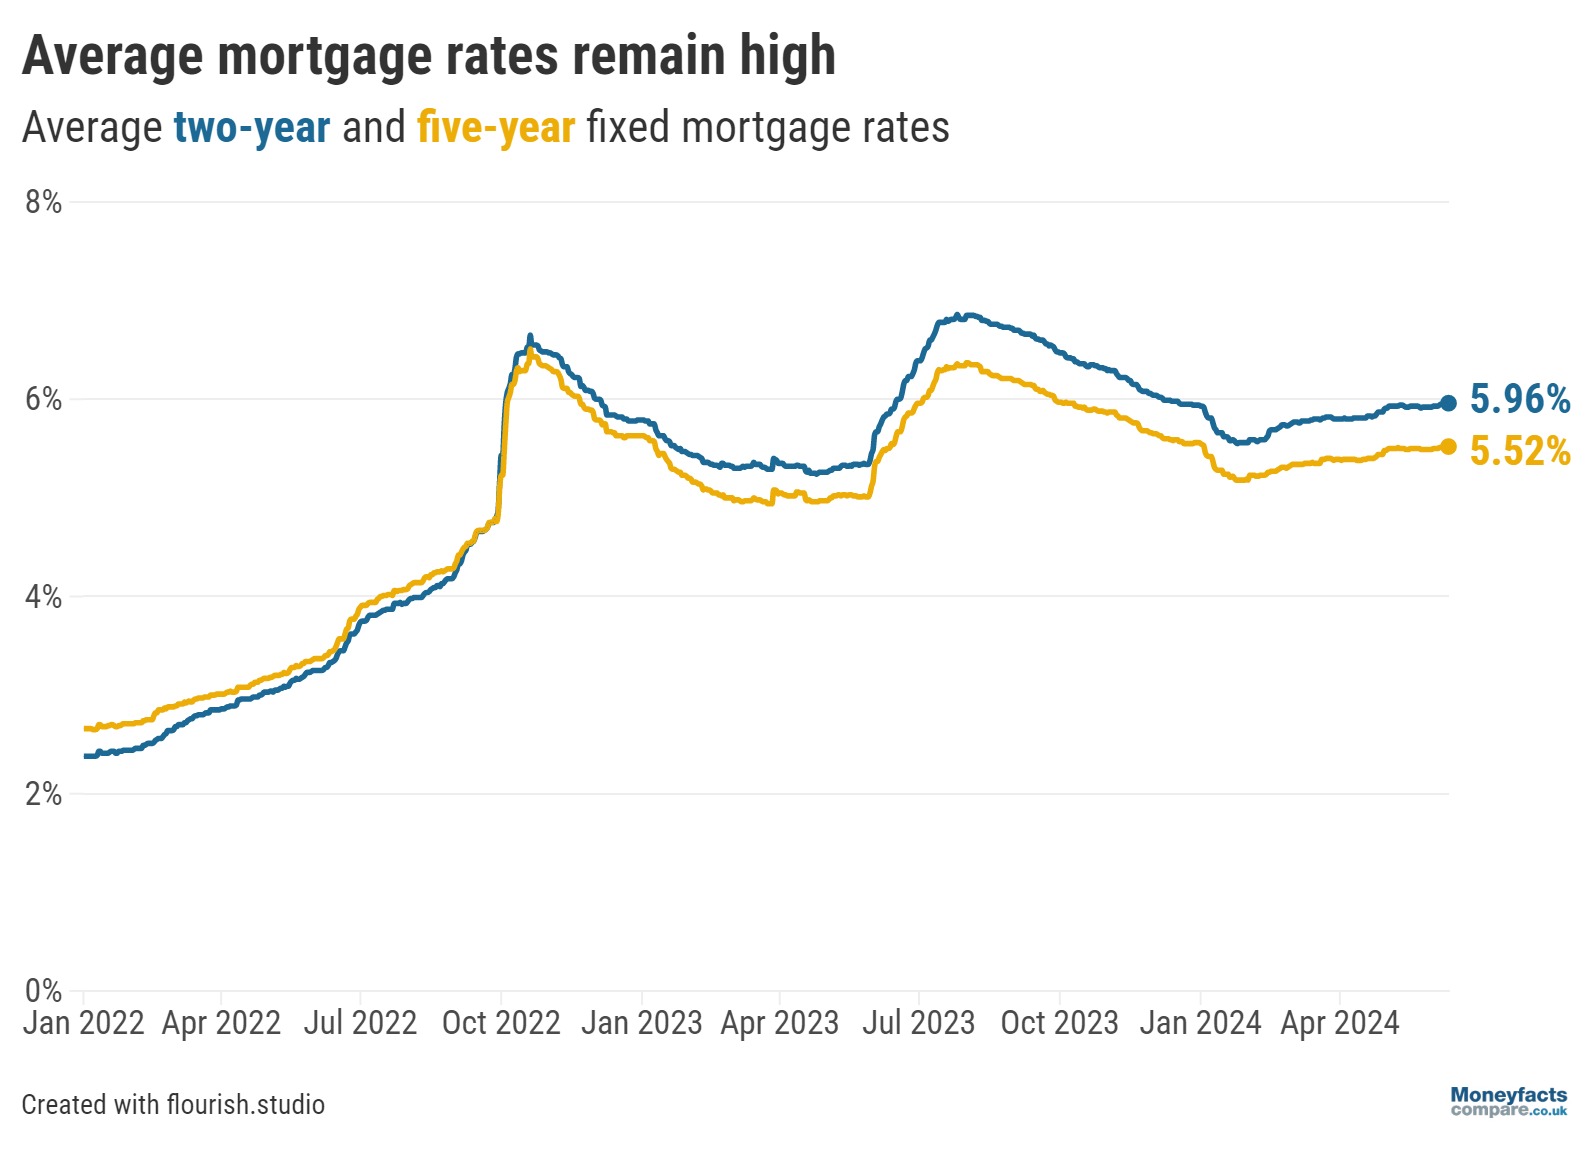 Average mortgage rates continued to rise slowly in May